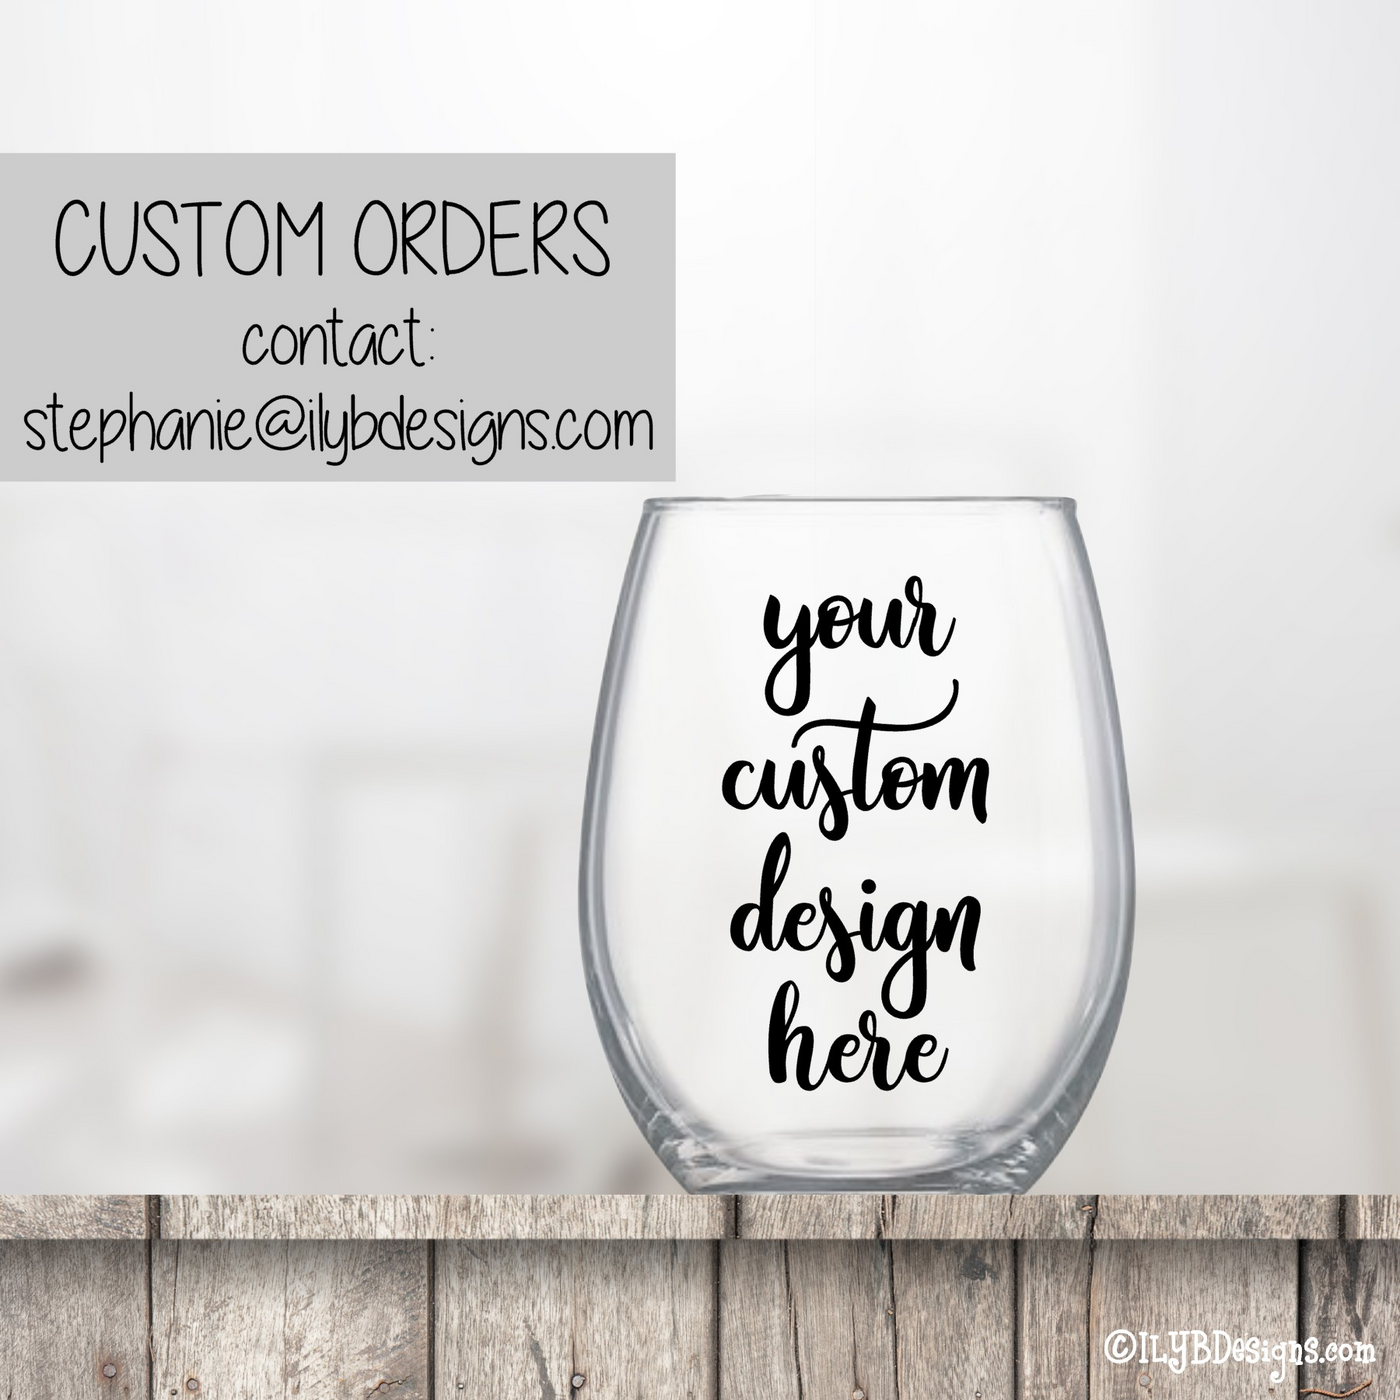 40th Birthday Wine Glass -  HOT AT 40 IT JUST COMES IN FLASHES - ILYB Designs